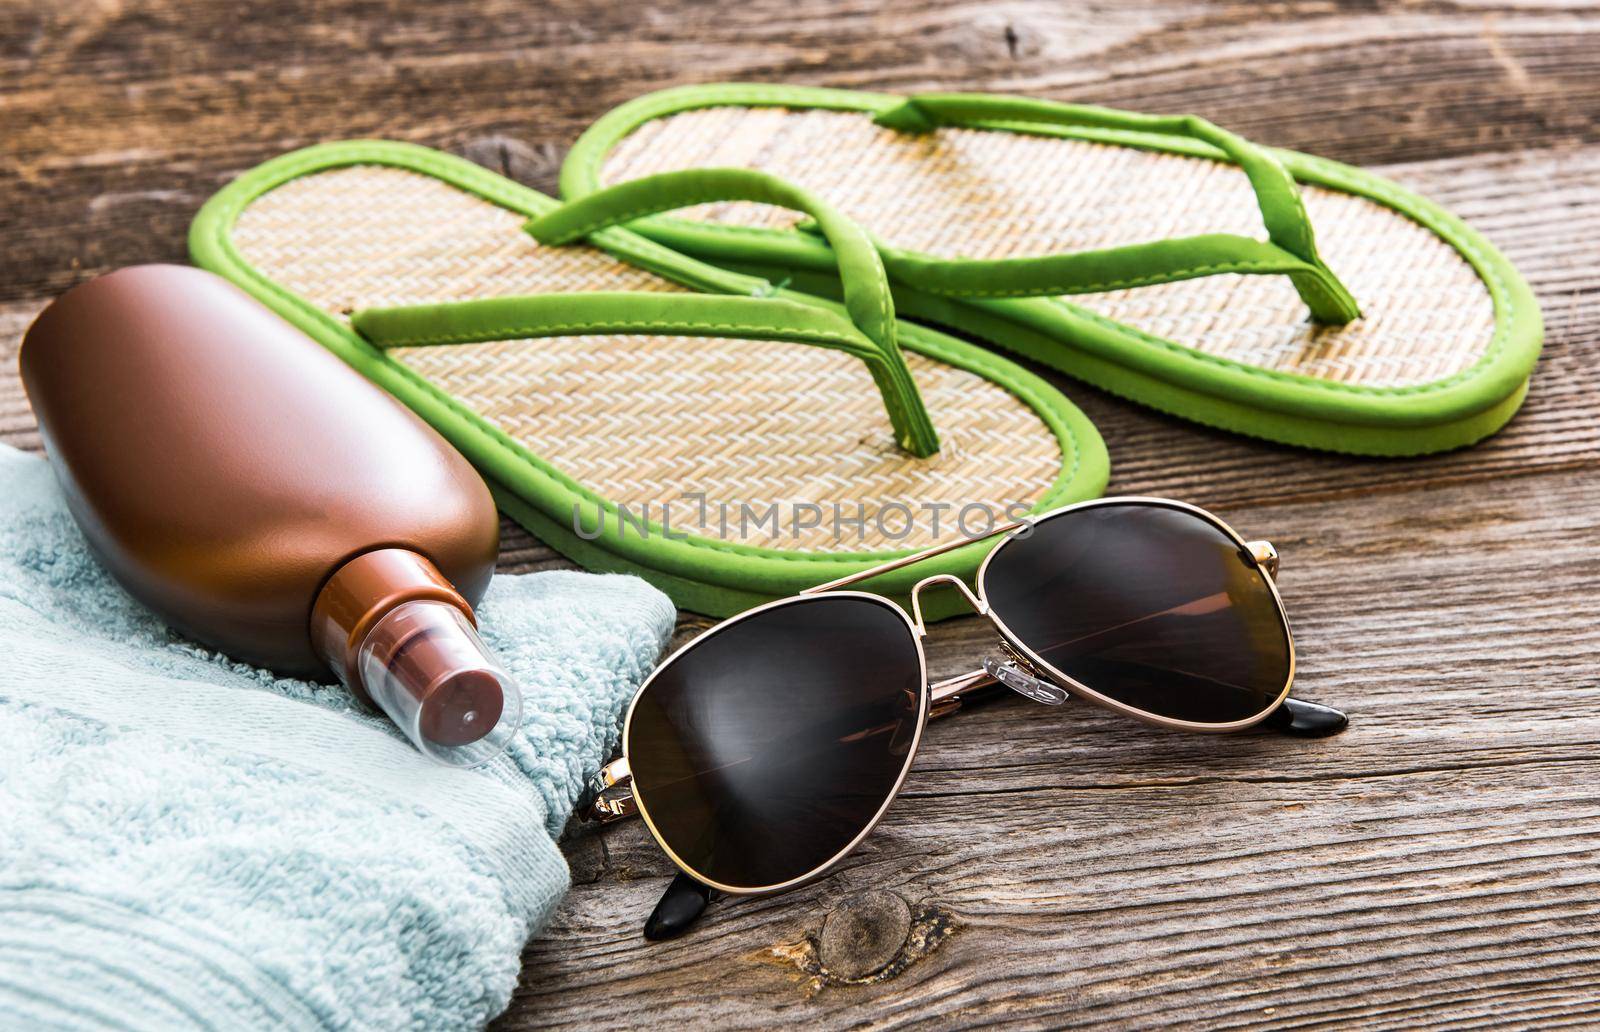 Beach accessories. Summer shoes and towel with sunglasses and suntan lotion on a wooden background